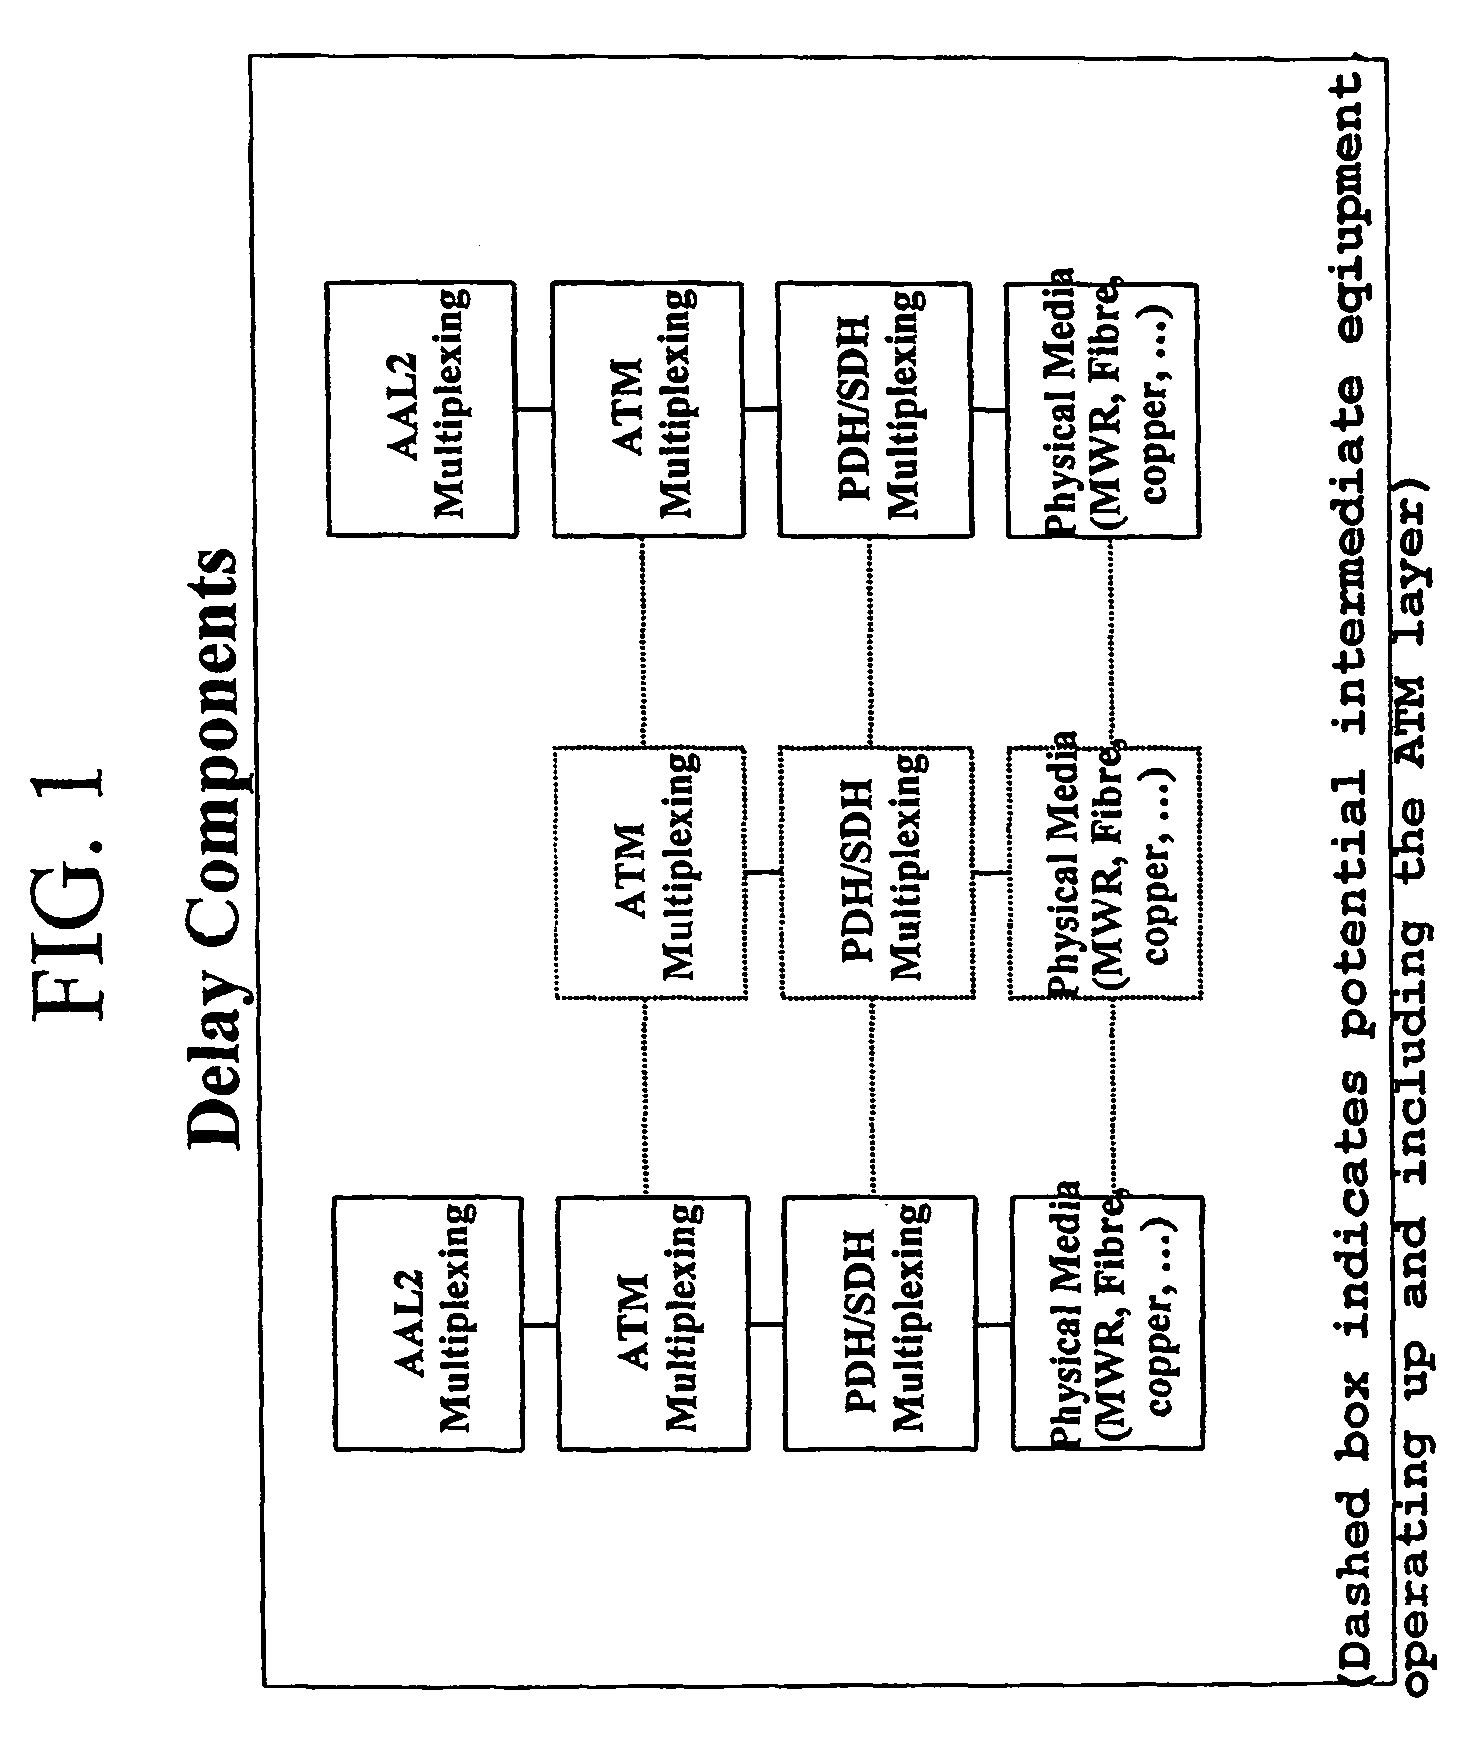 Configuring a data transmission interface in a communication network